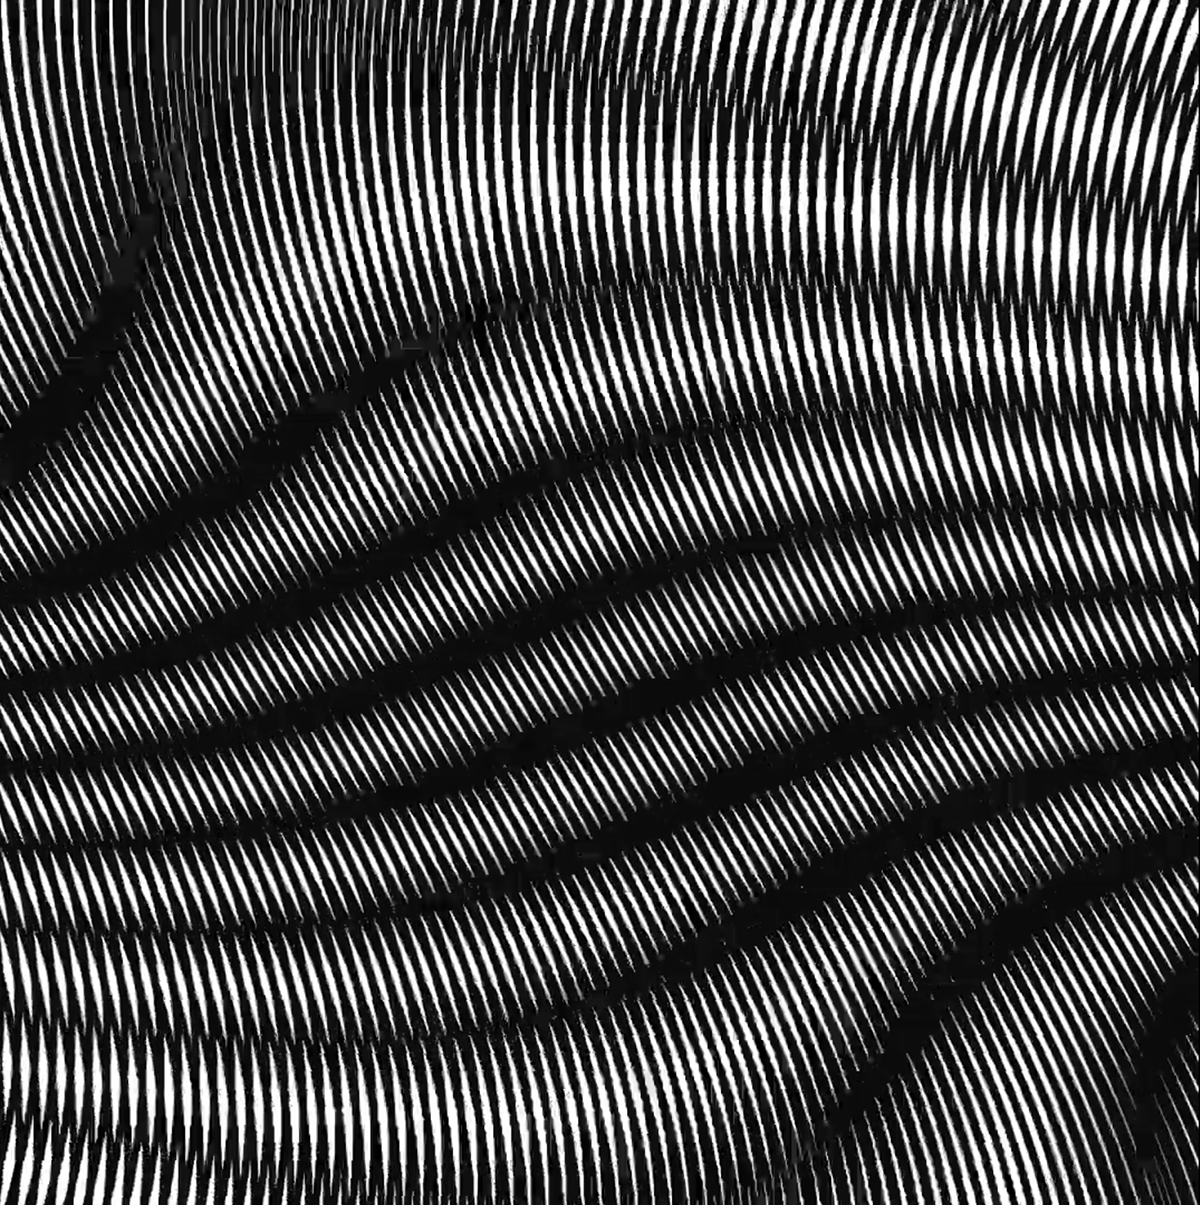 joren peters EJLN motion design graphic visual moire motion video black white pattern lines trippy psychedelic after effects